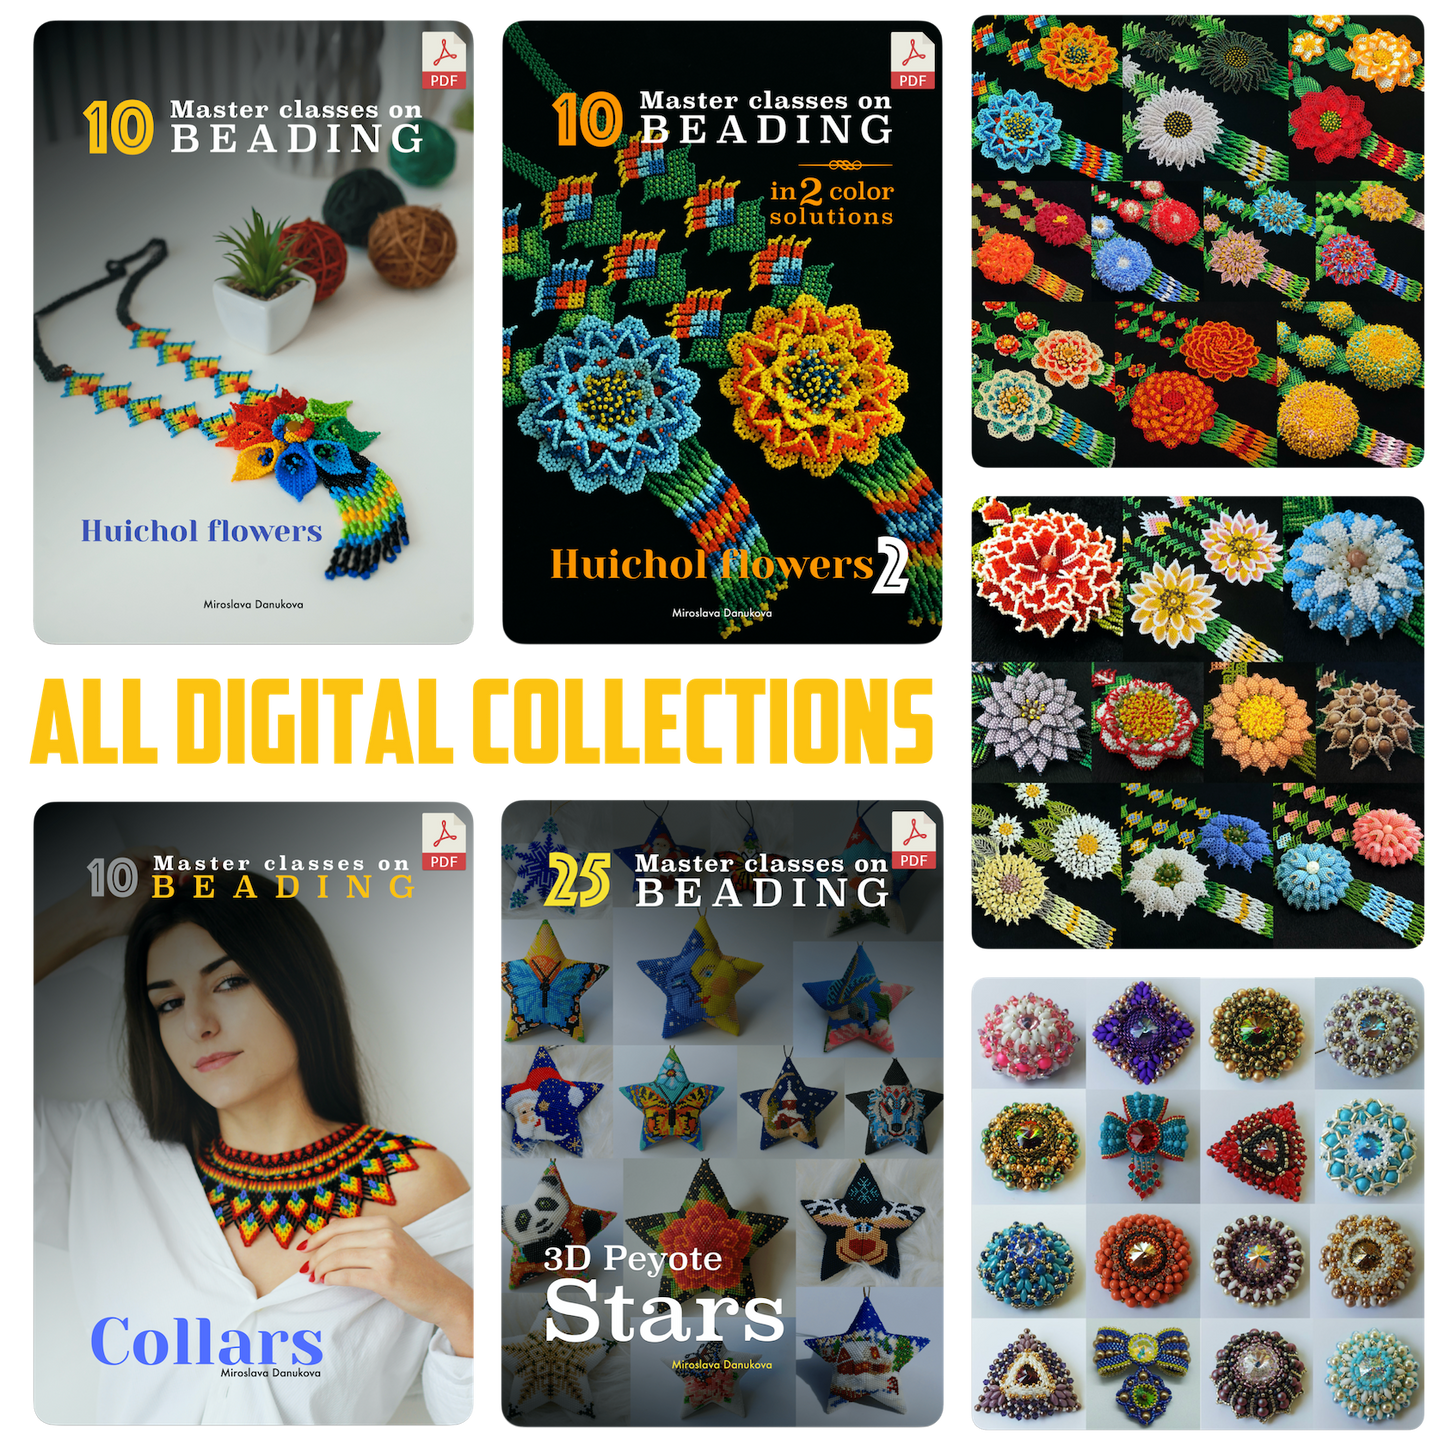 Complete Digital Collection: 55 PDFs + 38 Video Tutorials